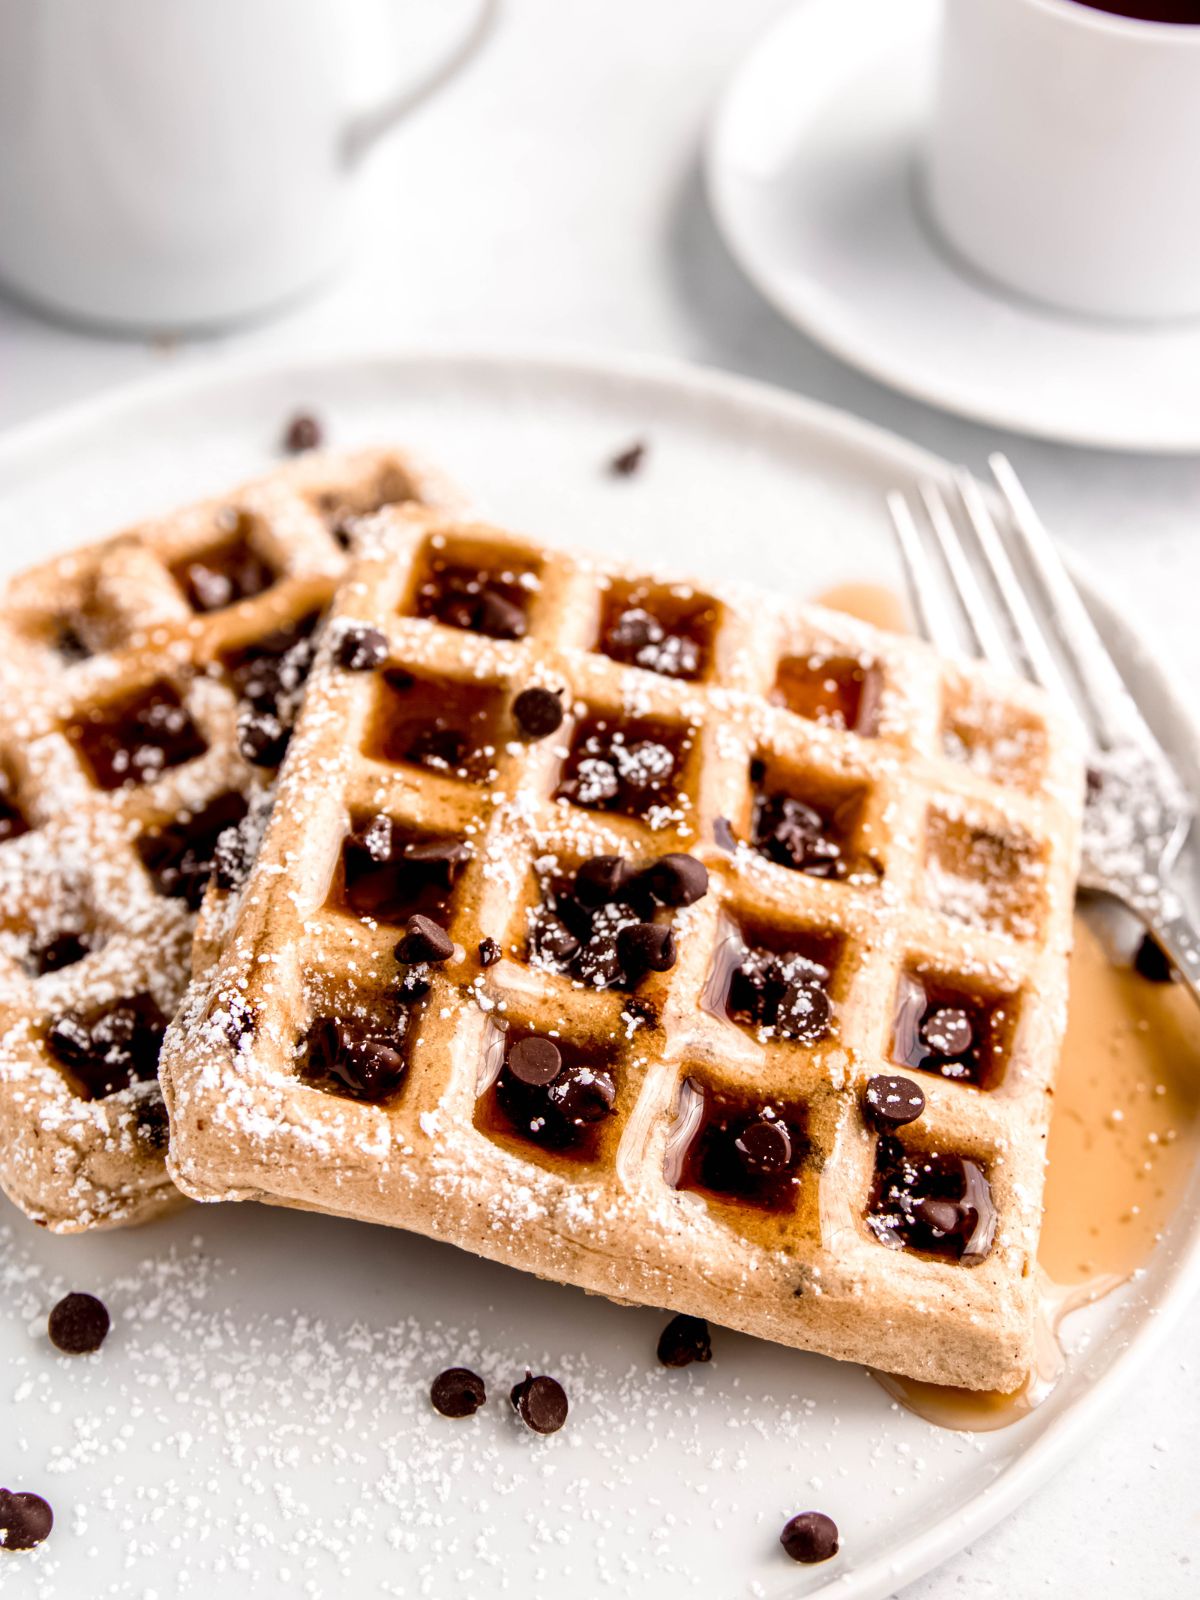 45 degree angle shot of two chocolate chip waffles topped with extra chocolate chips, maple syrup and powdered sugar on a white plate with a silver fork.